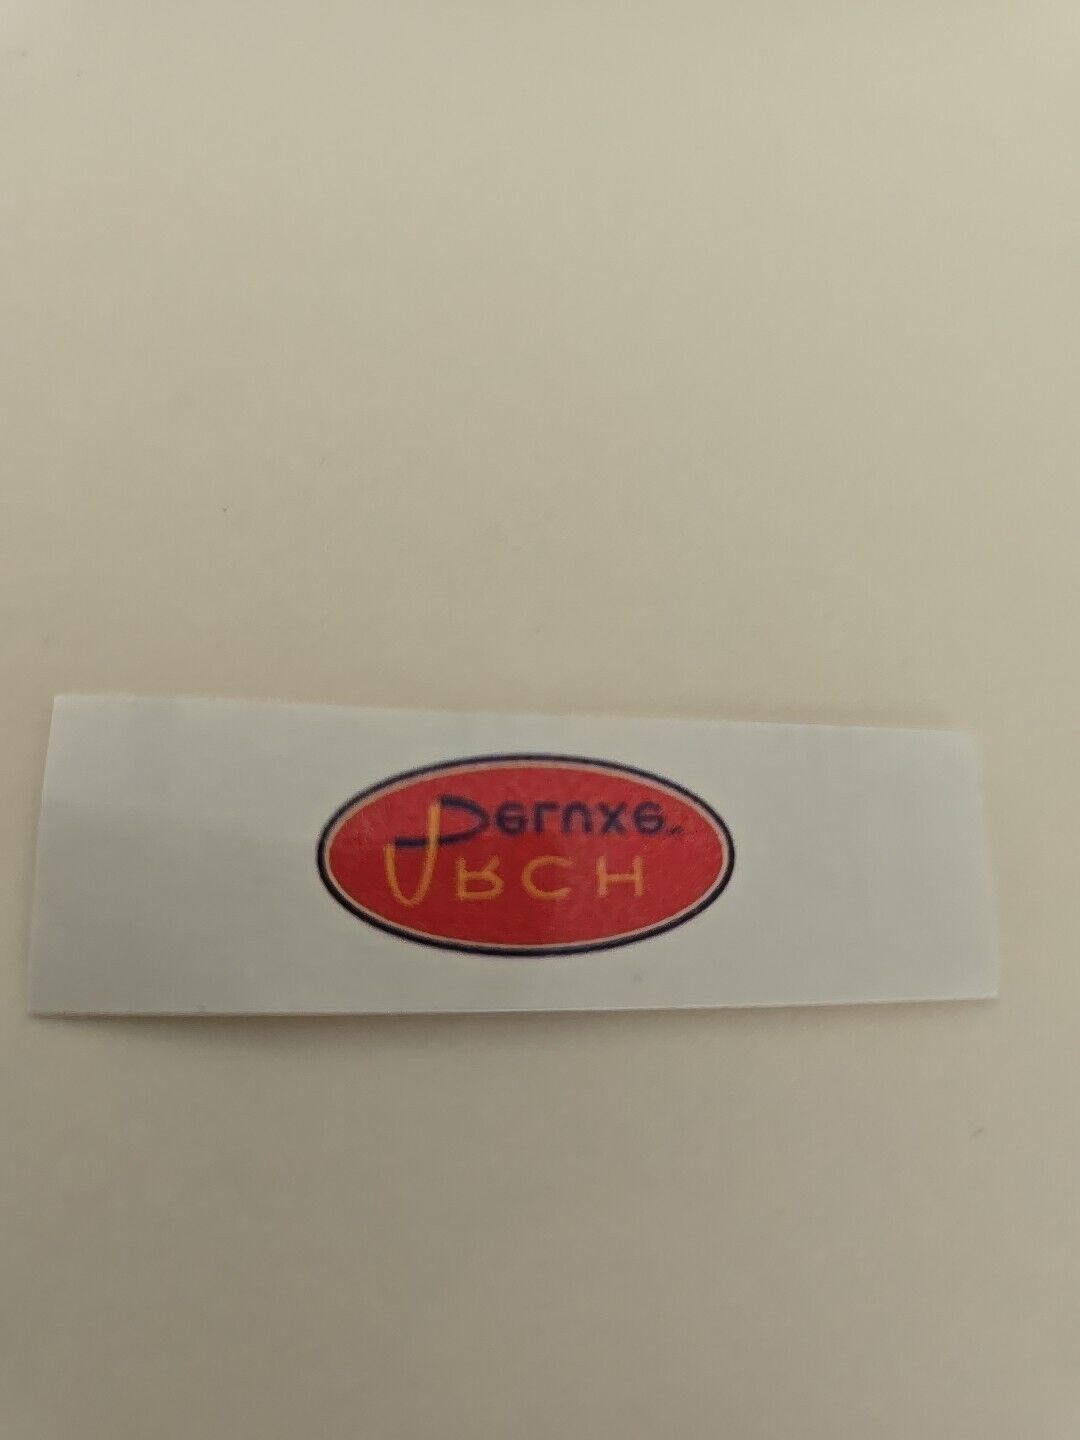 McDonald’s“Arch Deluxe”  1990s Vintage Decal 3/4 In. Long